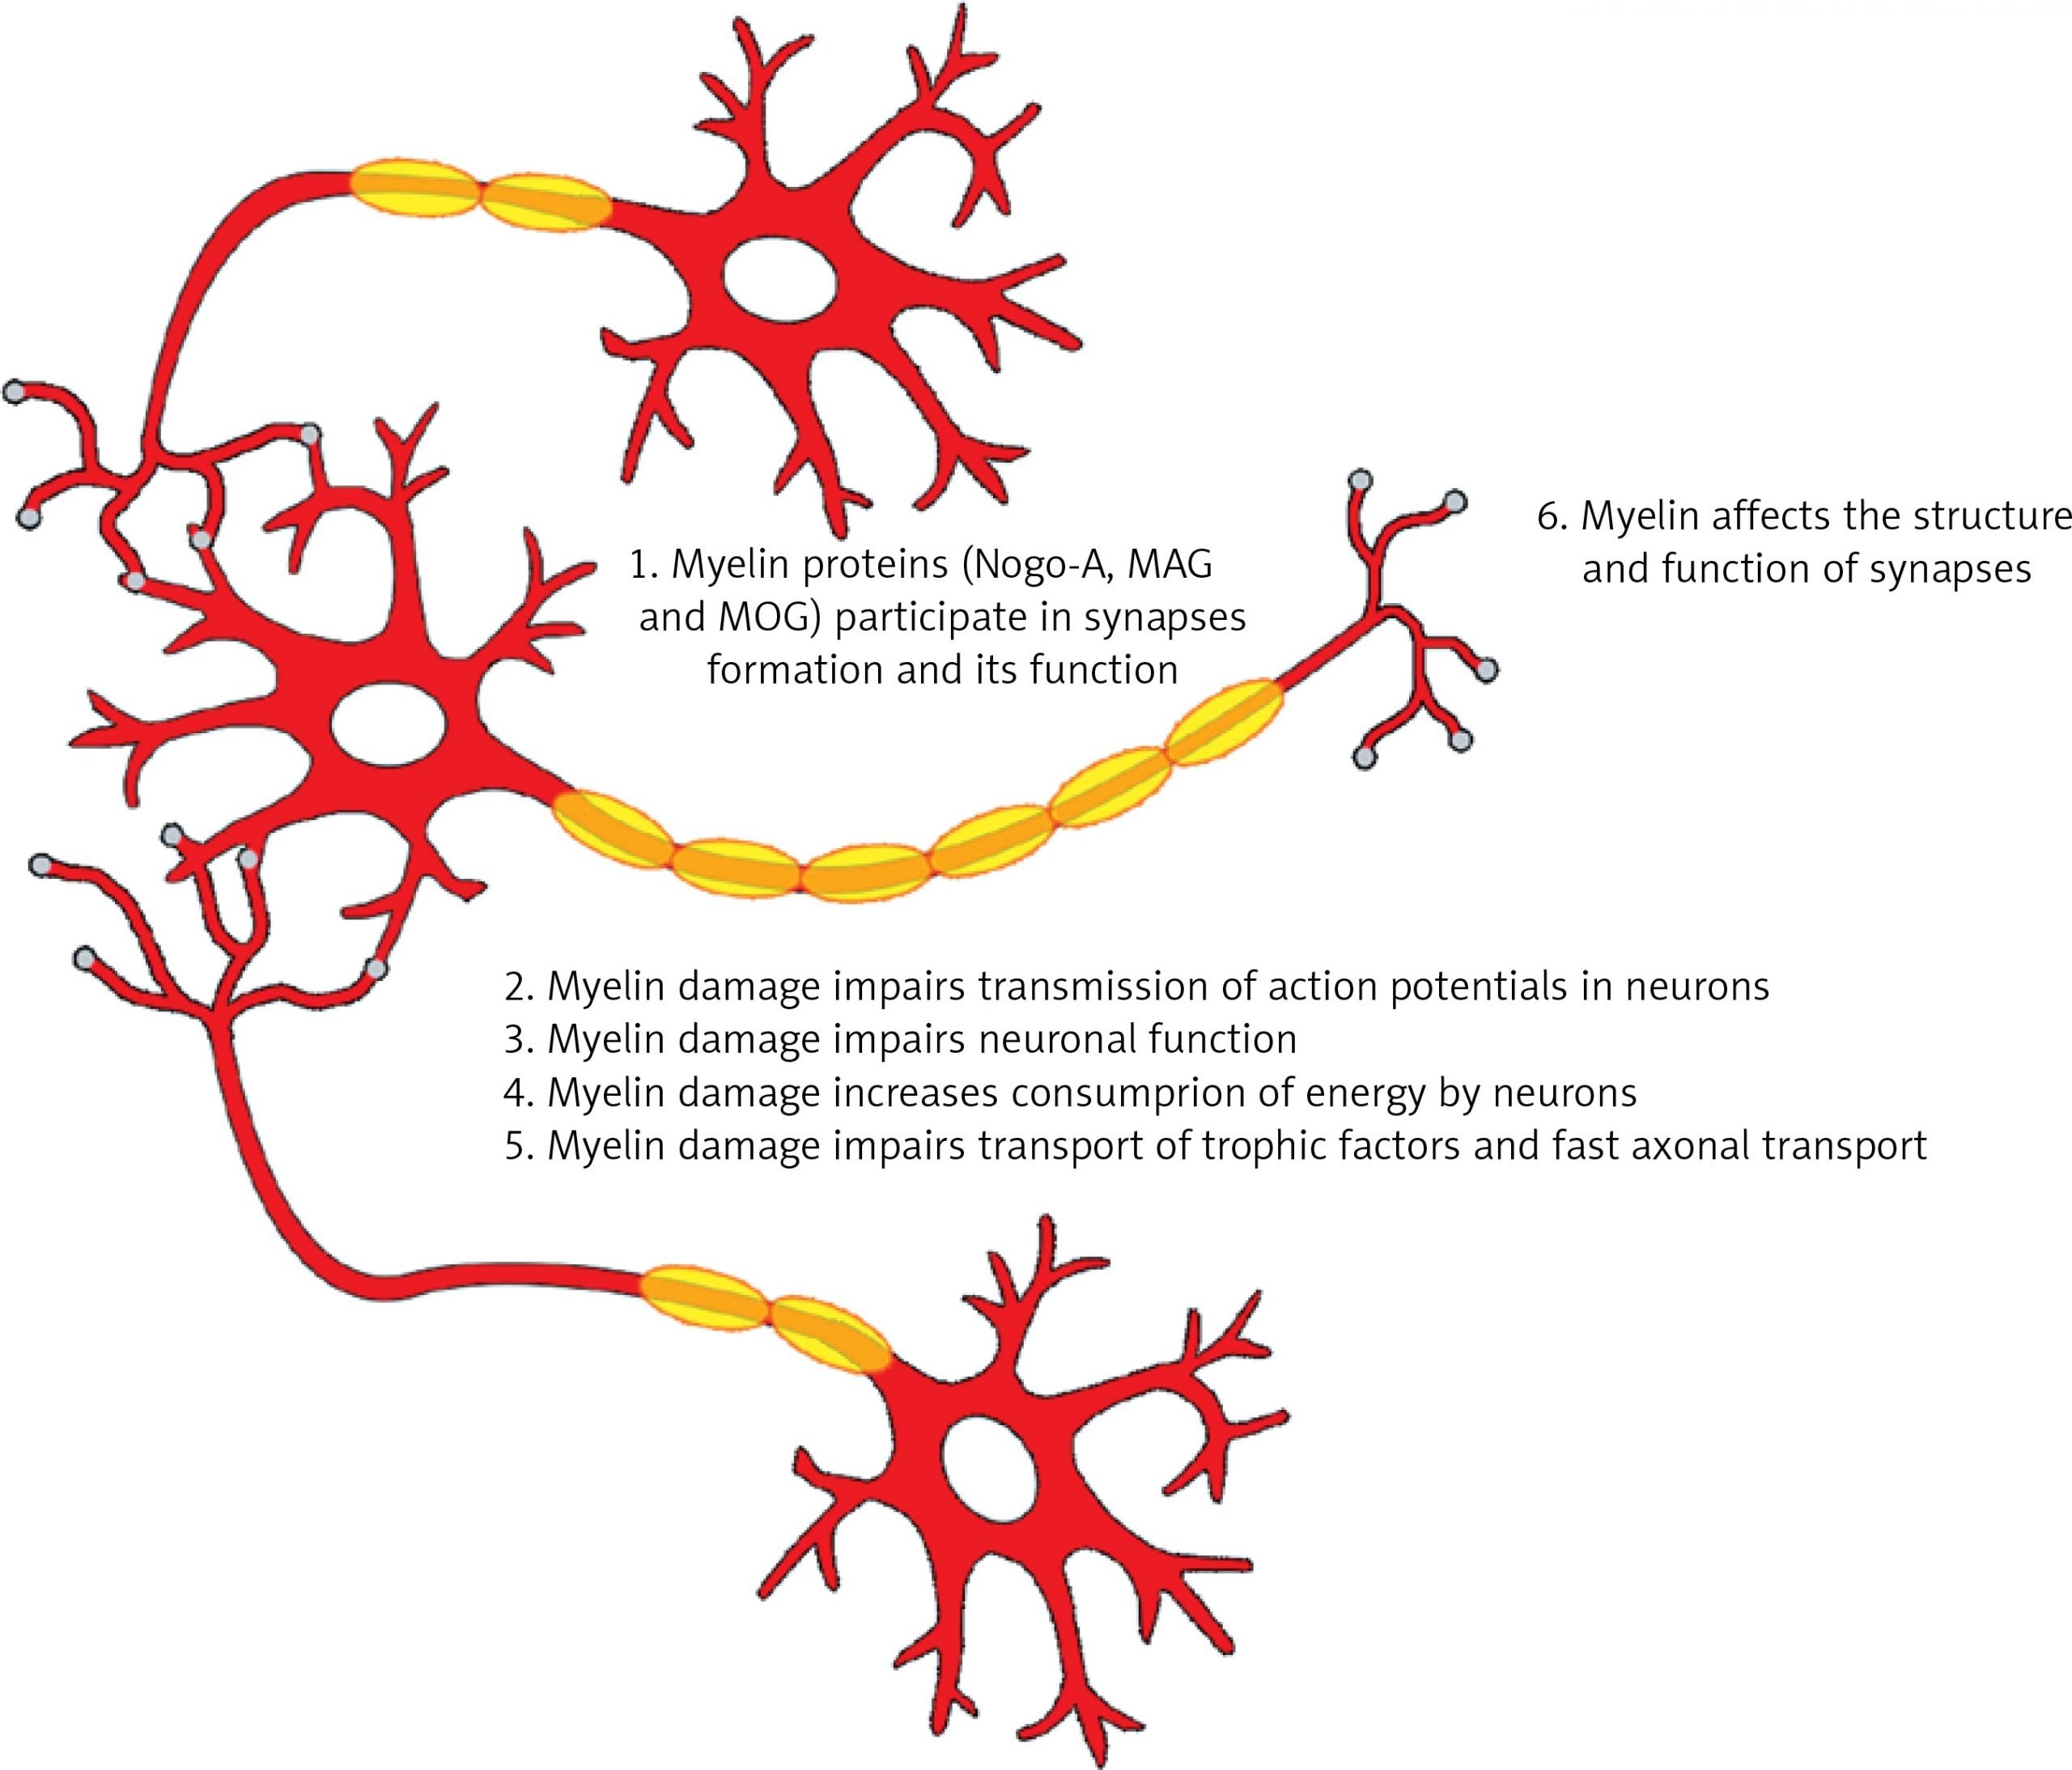 The role of myelin damage in Alzheimers disease pathology